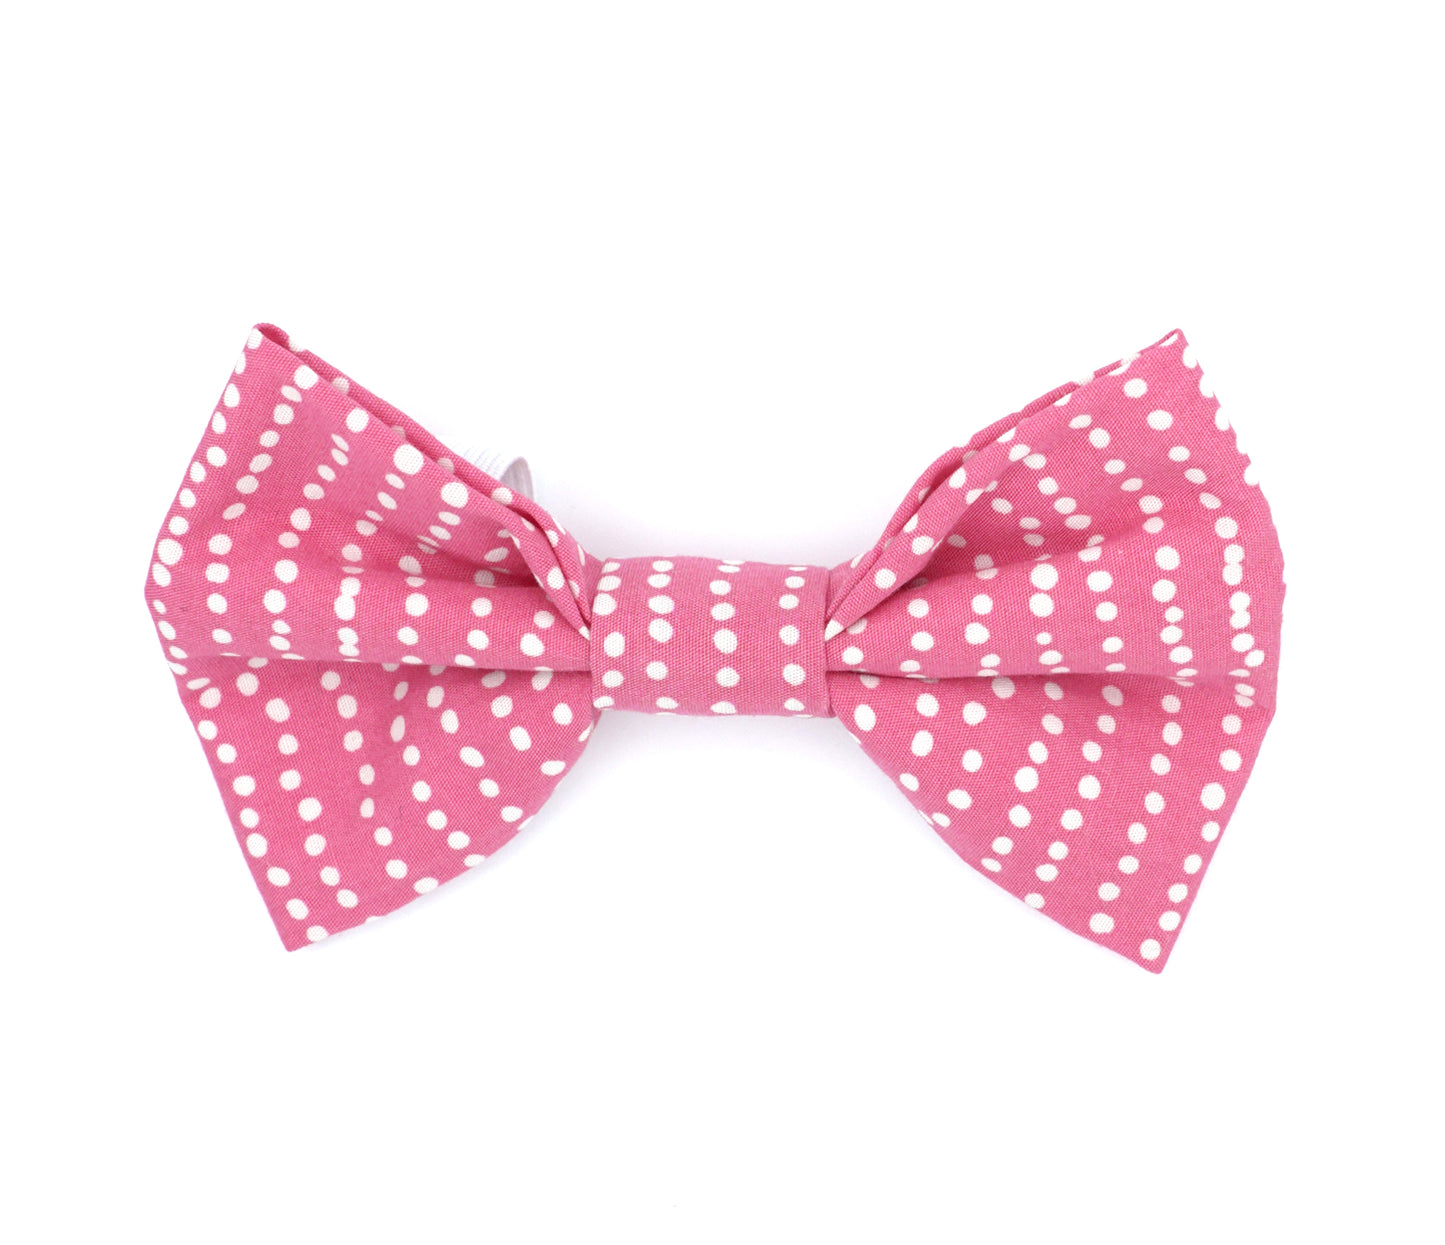 Handmade cotton bow tie for dogs (or other pets). Elastic straps on back with snaps make it easy to add to collar, harness, or leash. Hot pink background with "stripes" of irregular white dots.